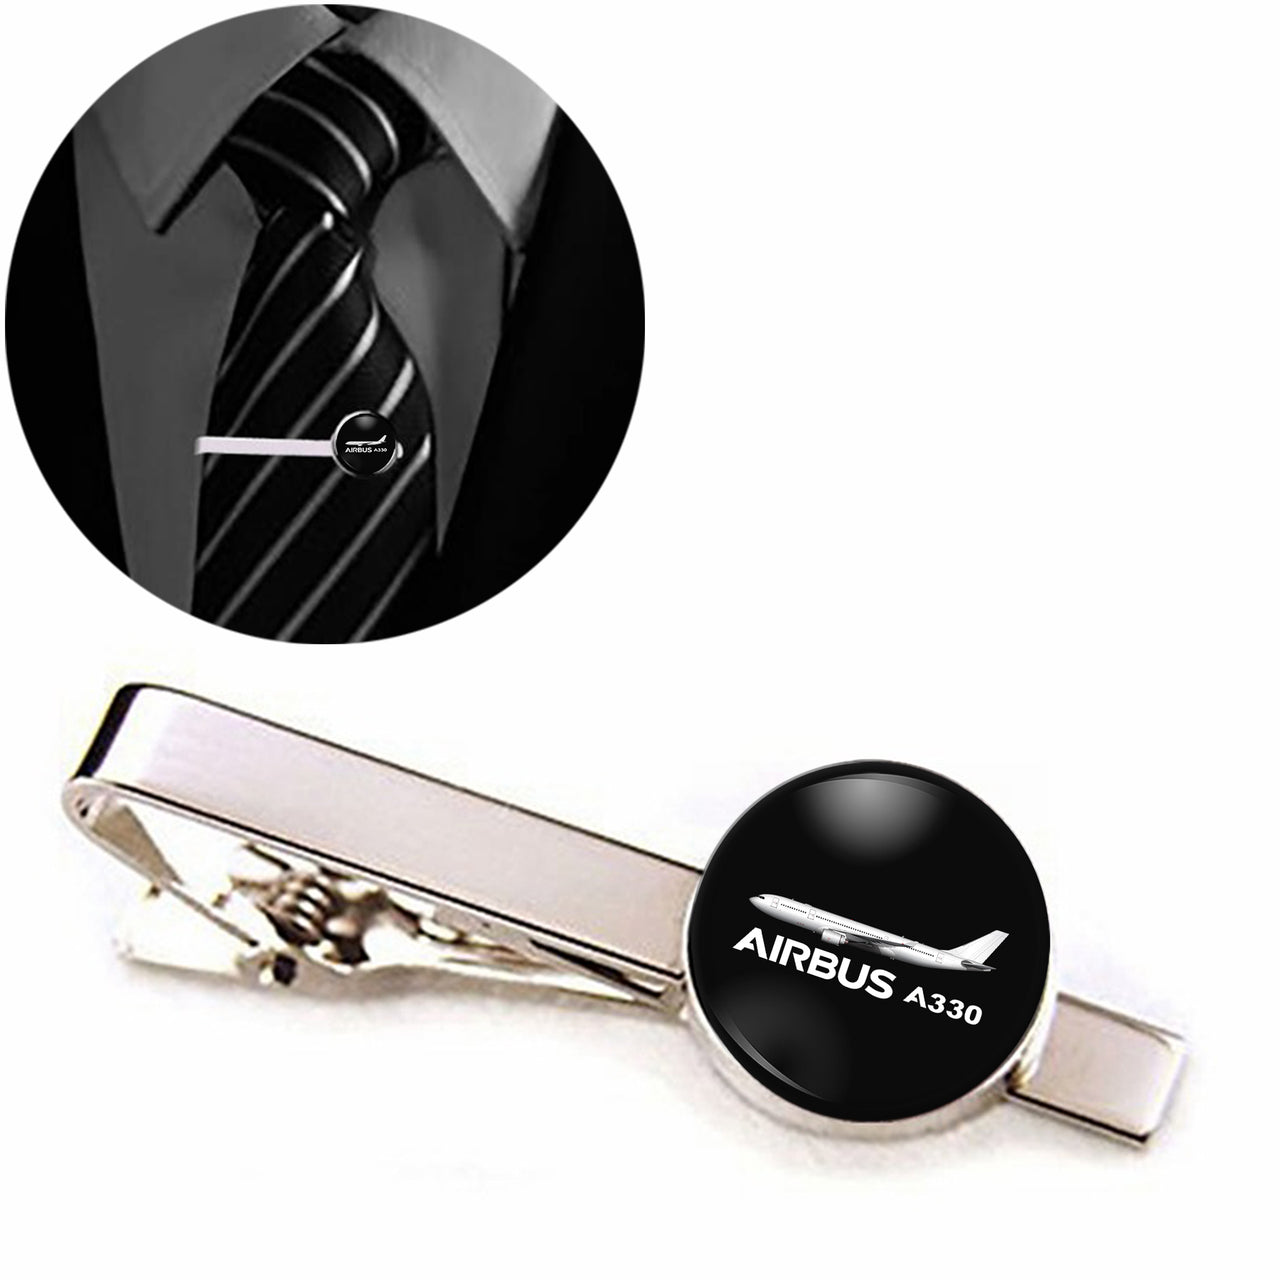 The Airbus A330 Designed Tie Clips